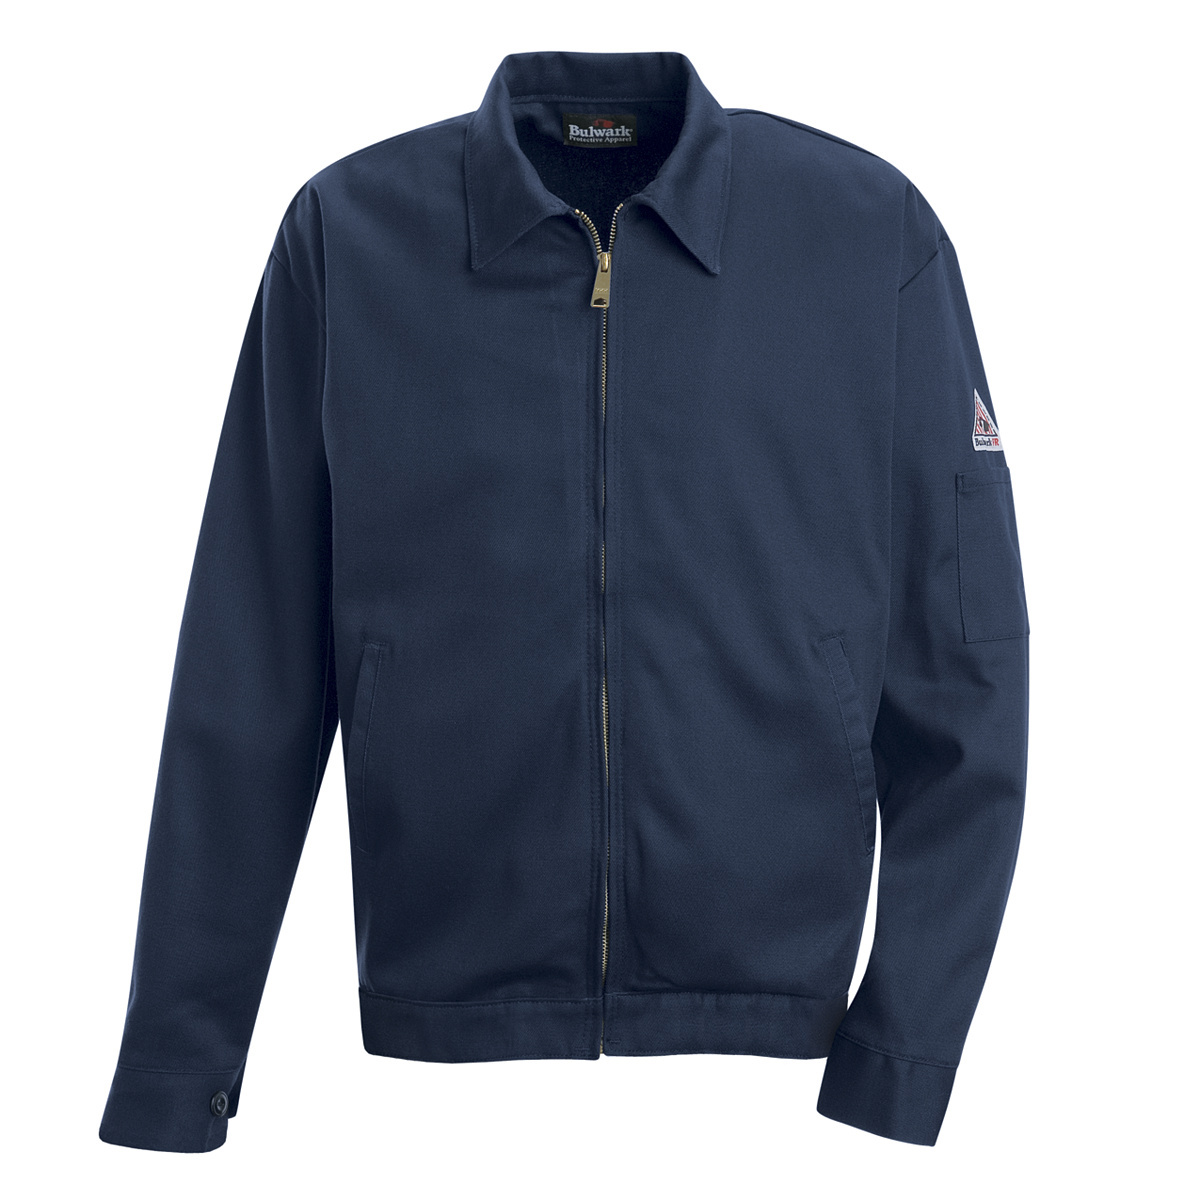 Bulwark® Large Tall Navy Blue EXCEL FR® Twill Cotton Flame Resistant Jacket With Zipper Front Closure